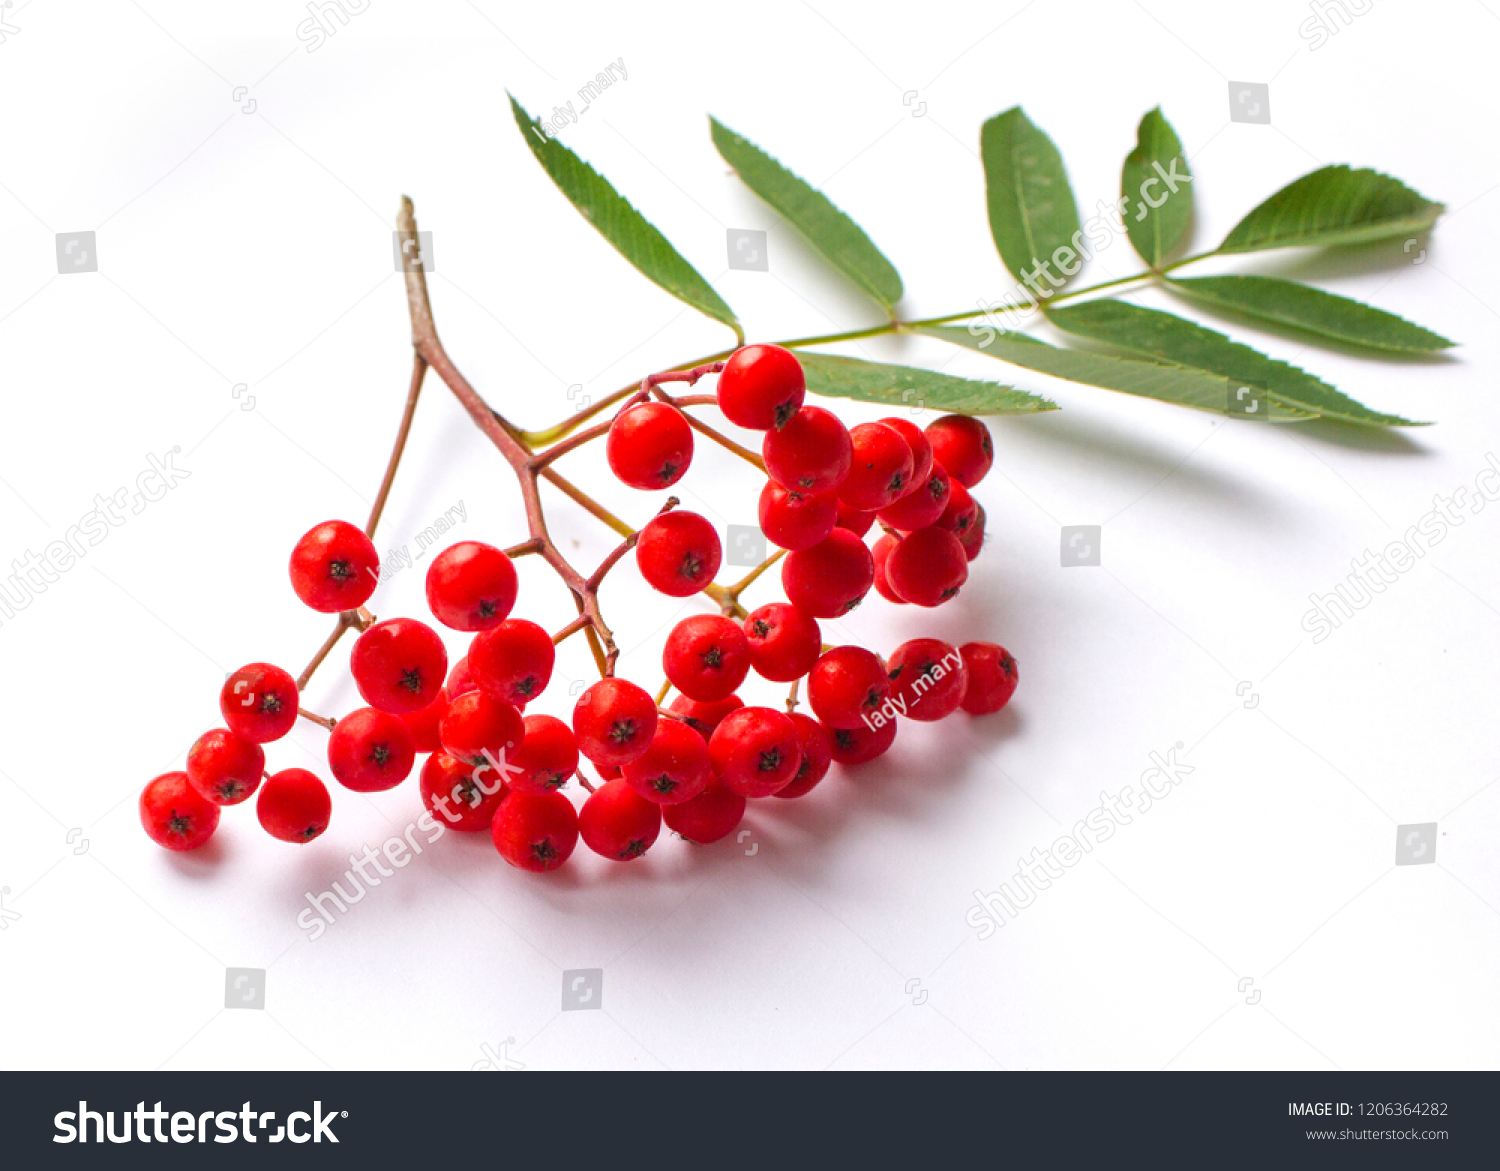 19 Aurumn Leaves Isolated Stock Photos, Images & Photography | Shutterstock